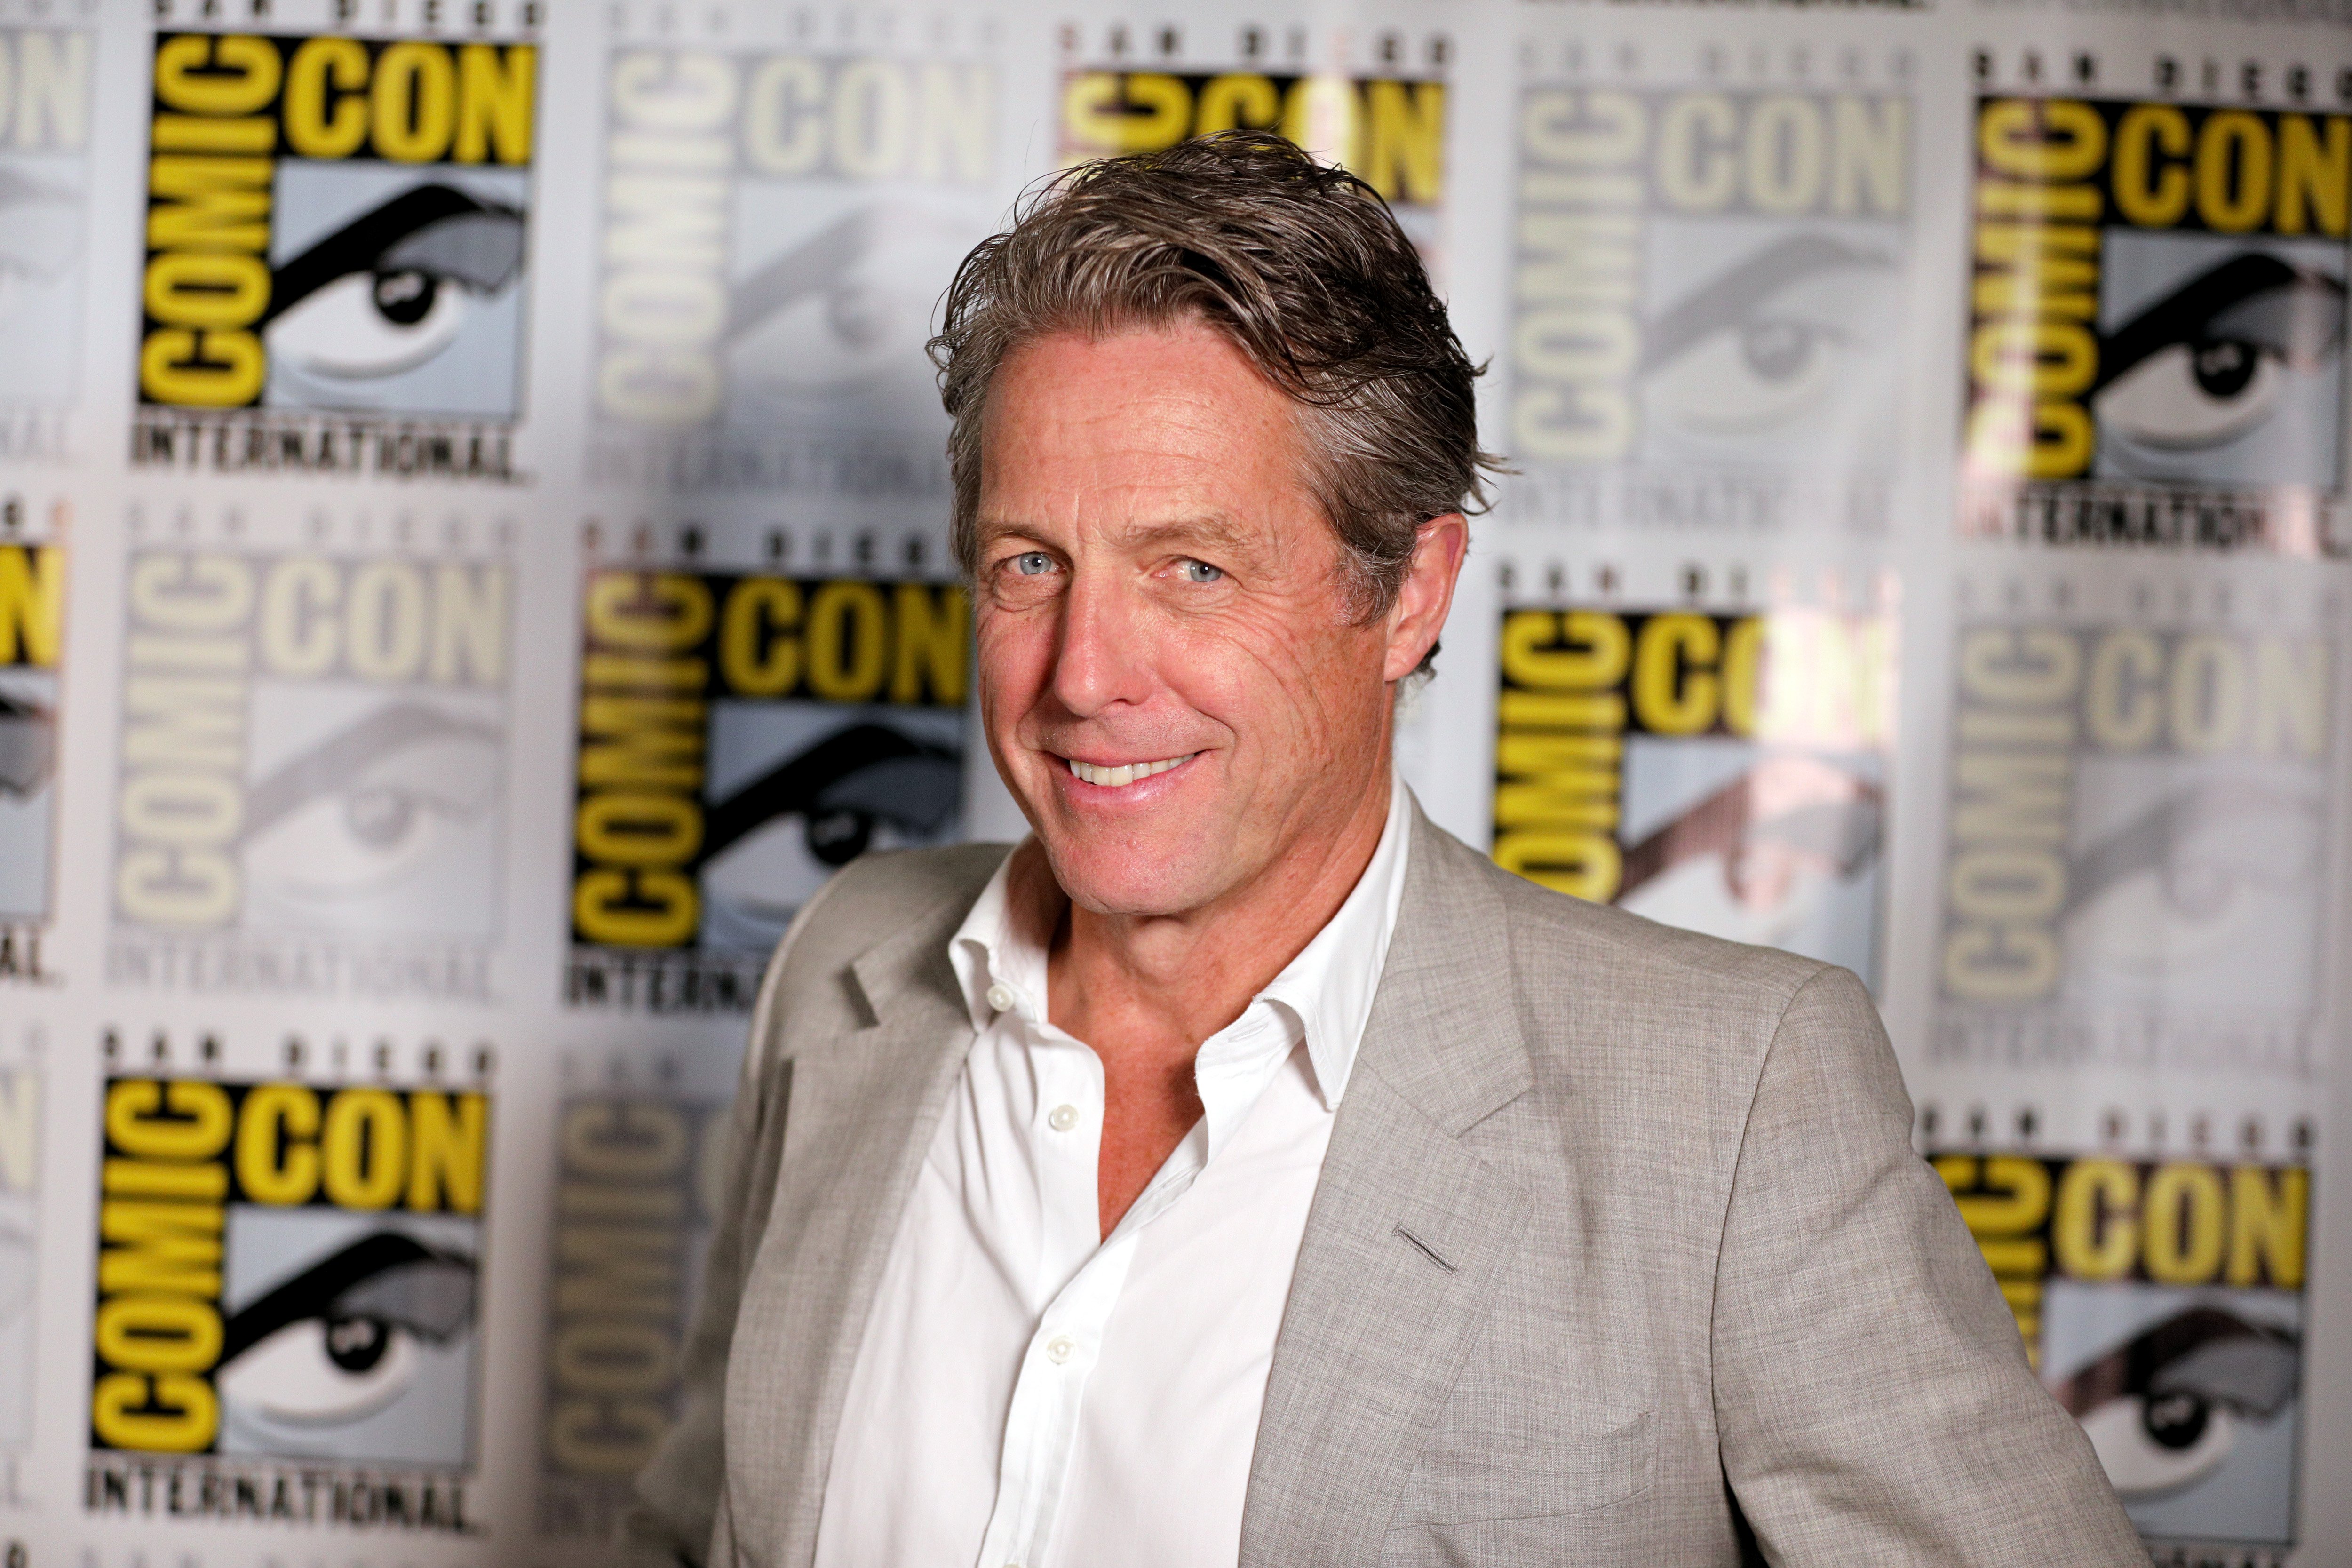 Hugh Grant attends Paramount Pictures and eOne's Comic-Con presentation of "Dungeons & Dragons: Honor Among Thieves" in San Diego. July 21, 2022. | Source: Getty Images